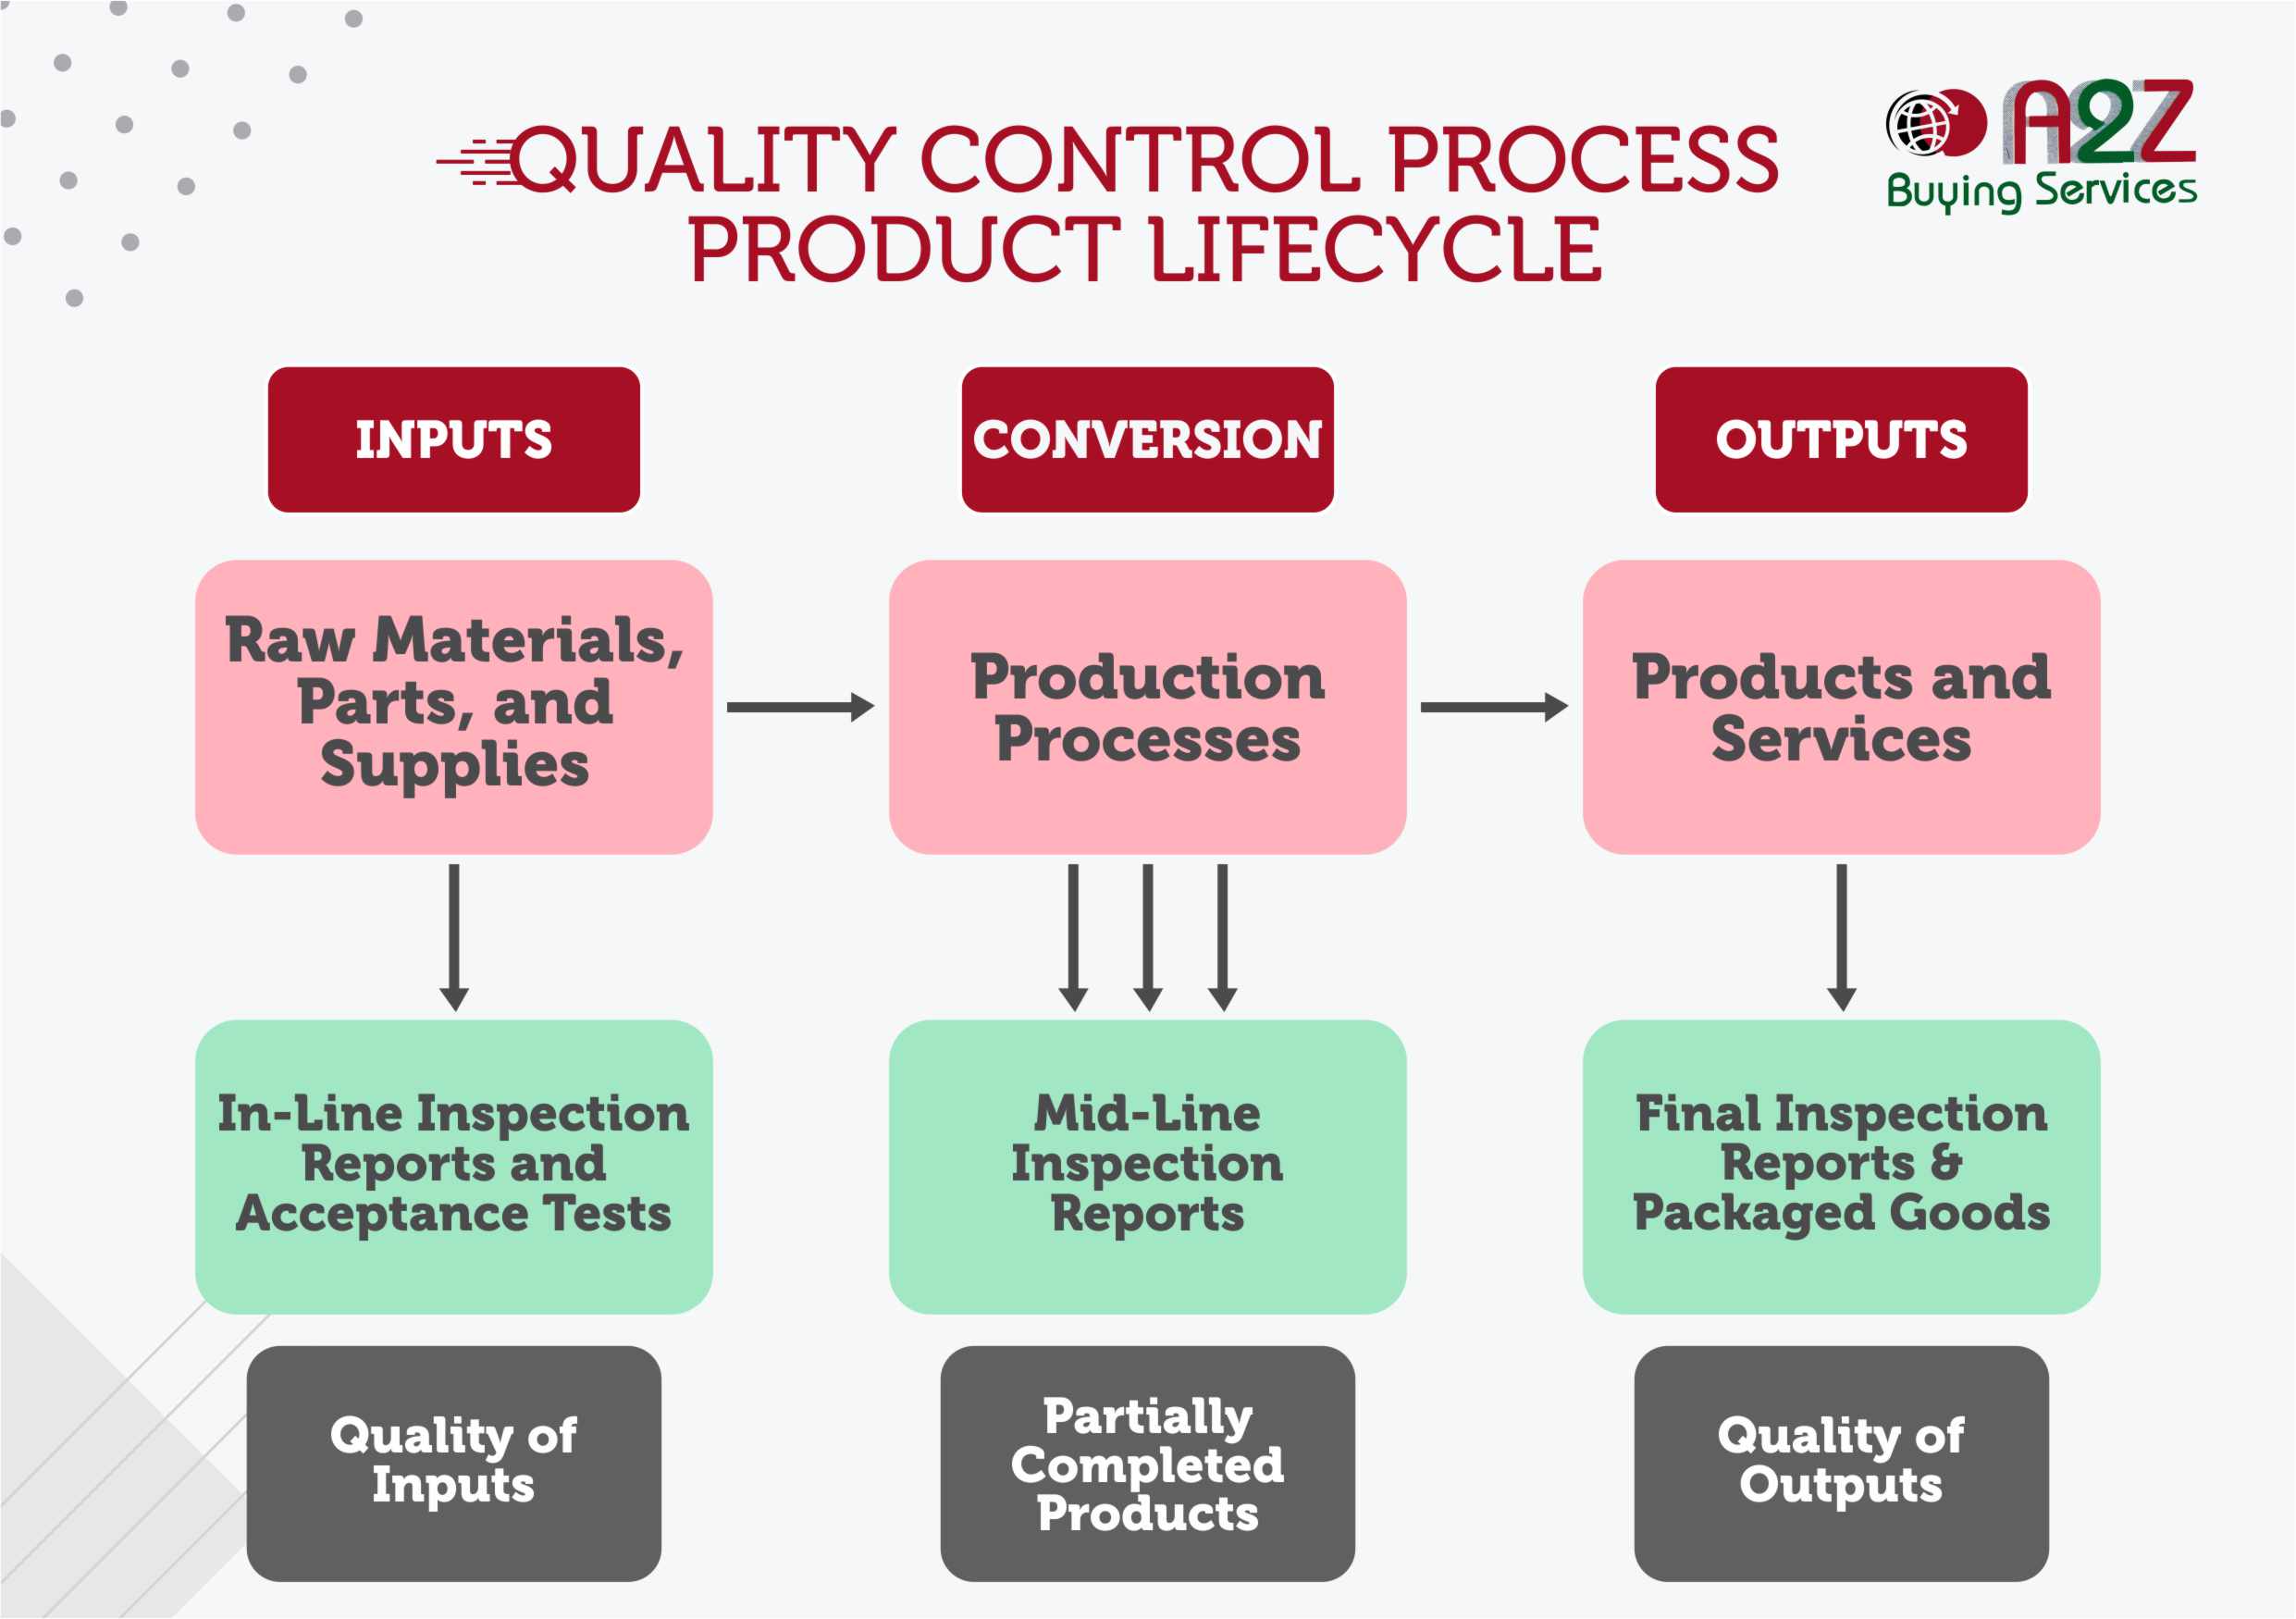 Quality Control Services